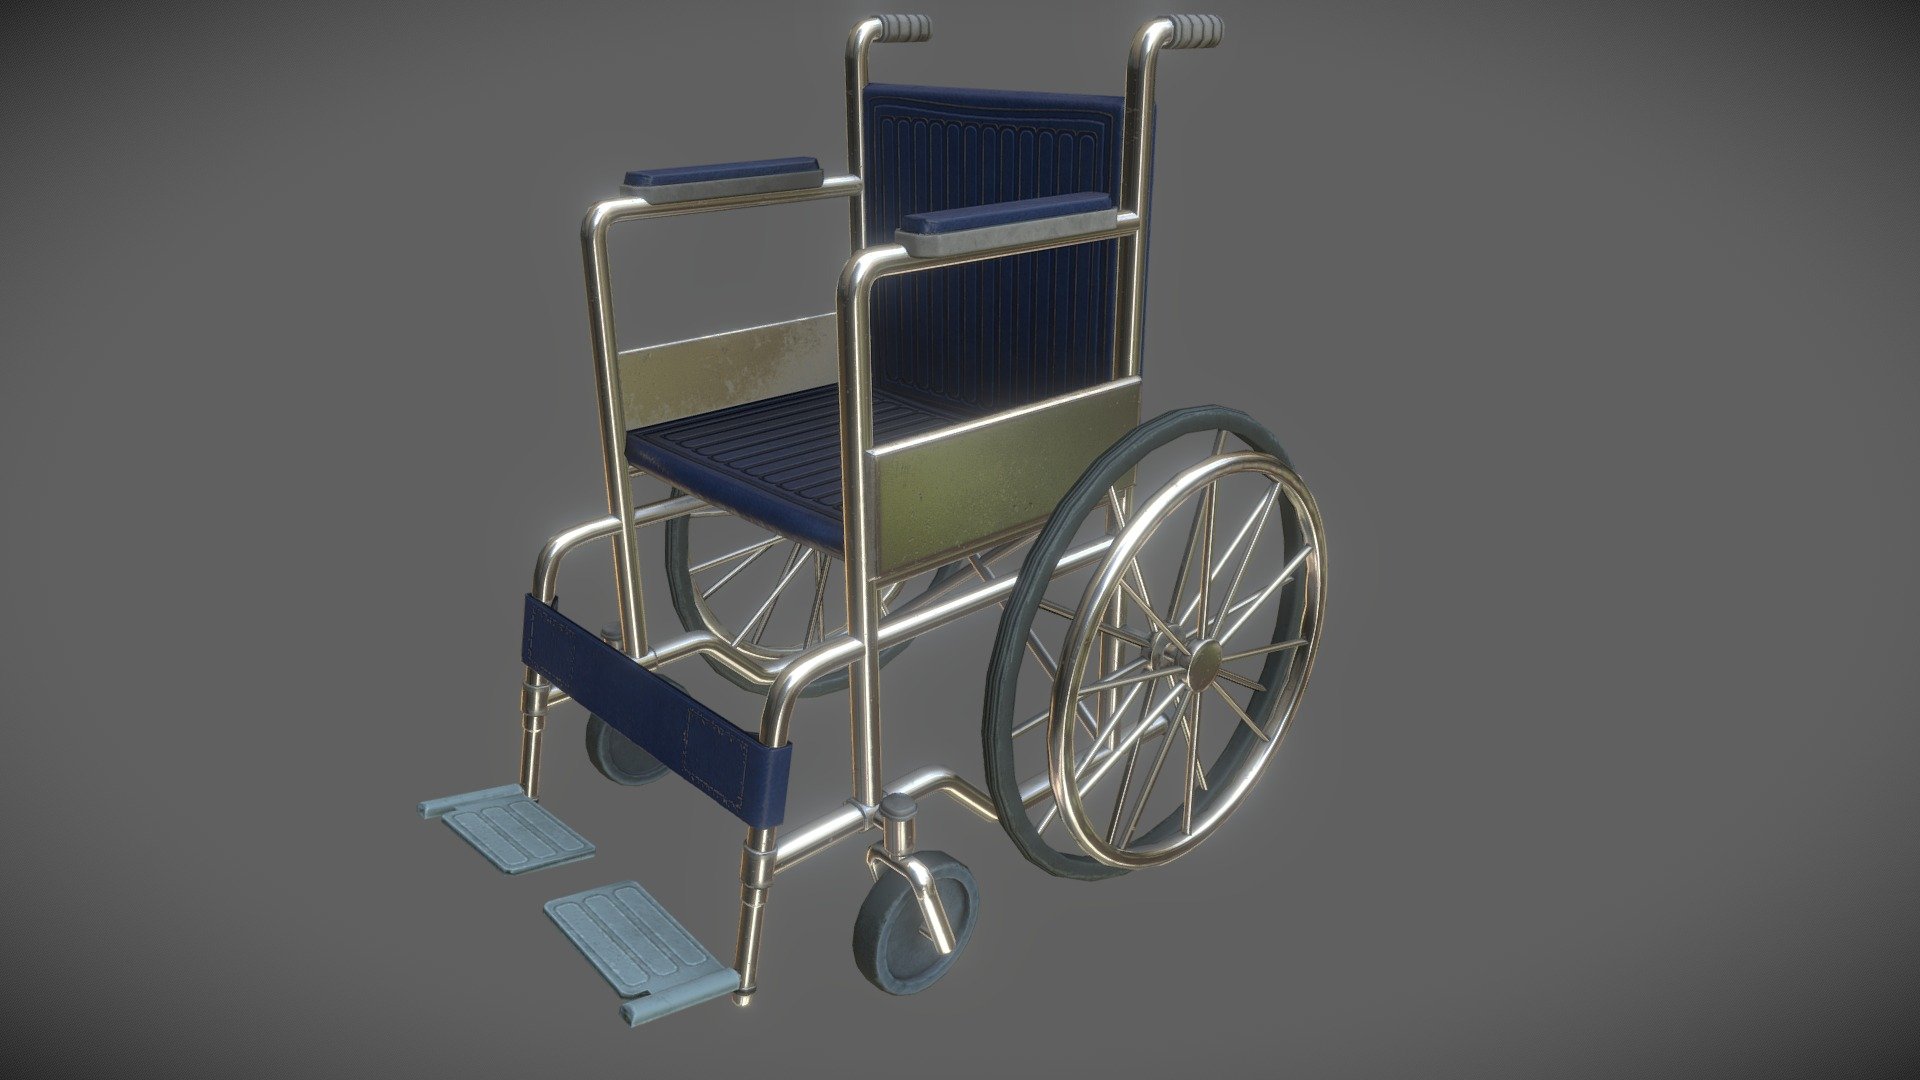 Wheel chair asset for an unreleased independent game 3d model